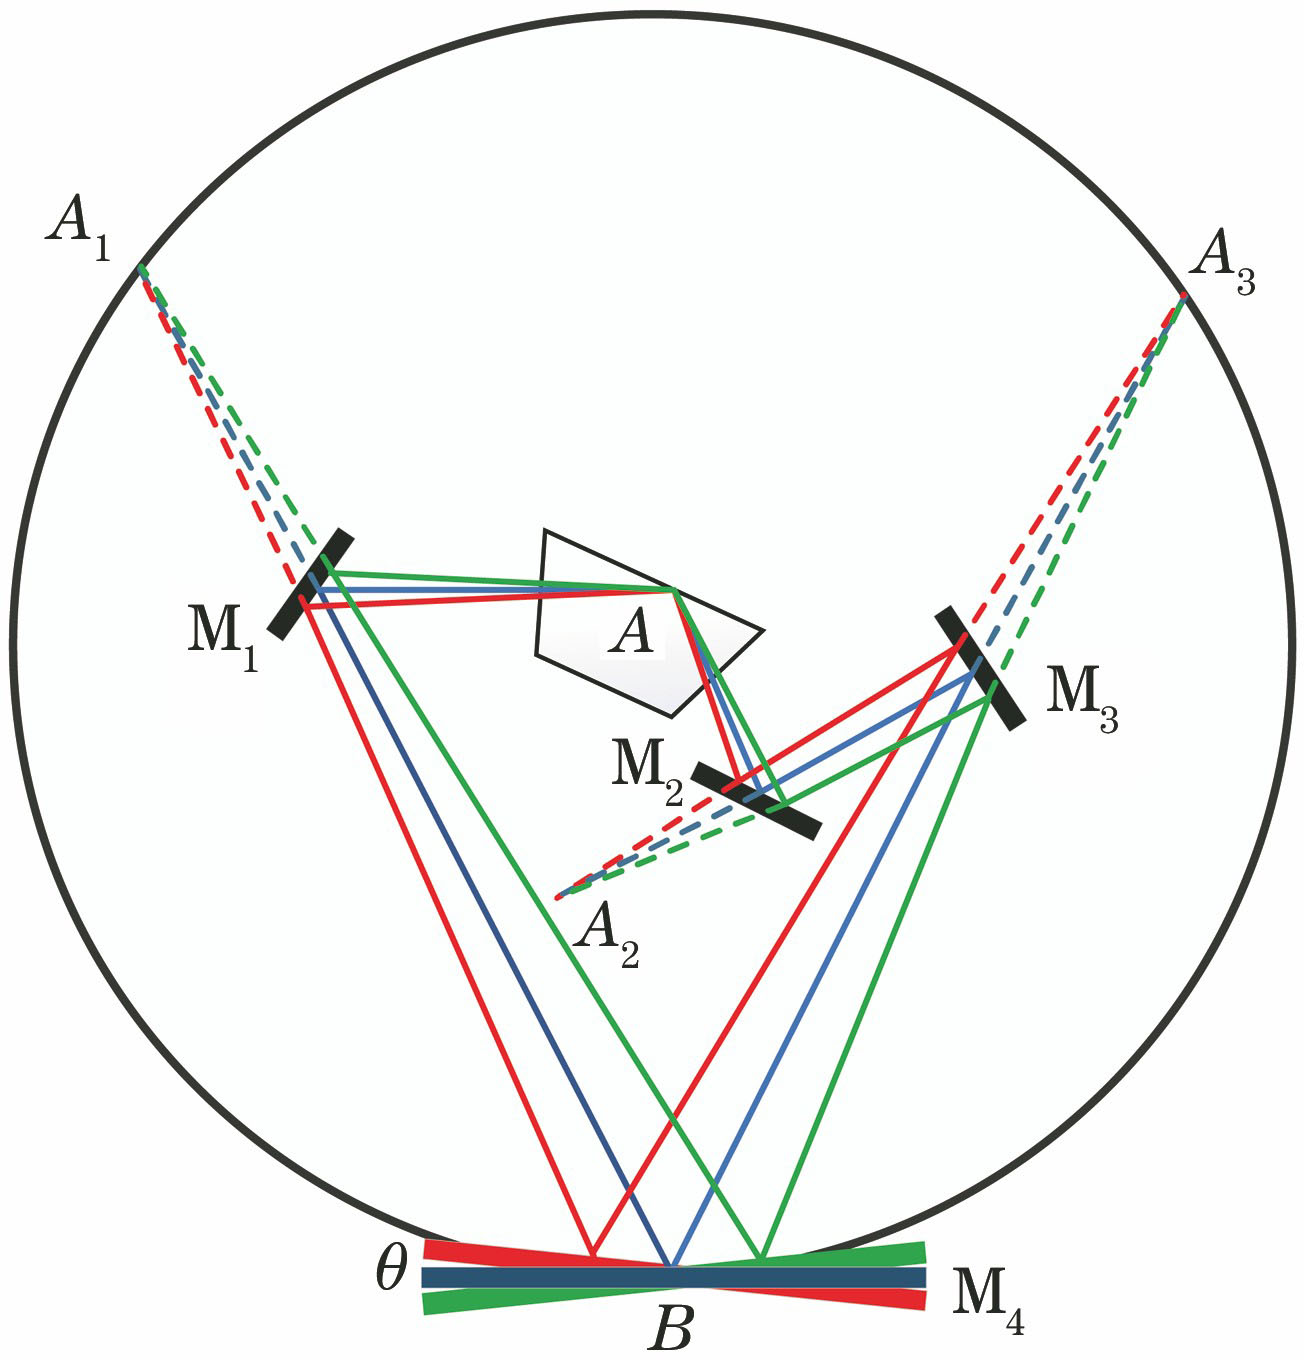 Optical design of ring-cavity configuration, in which red, blue, and green lines indicating potential routes of Stokes wave through rotating the angle of M4